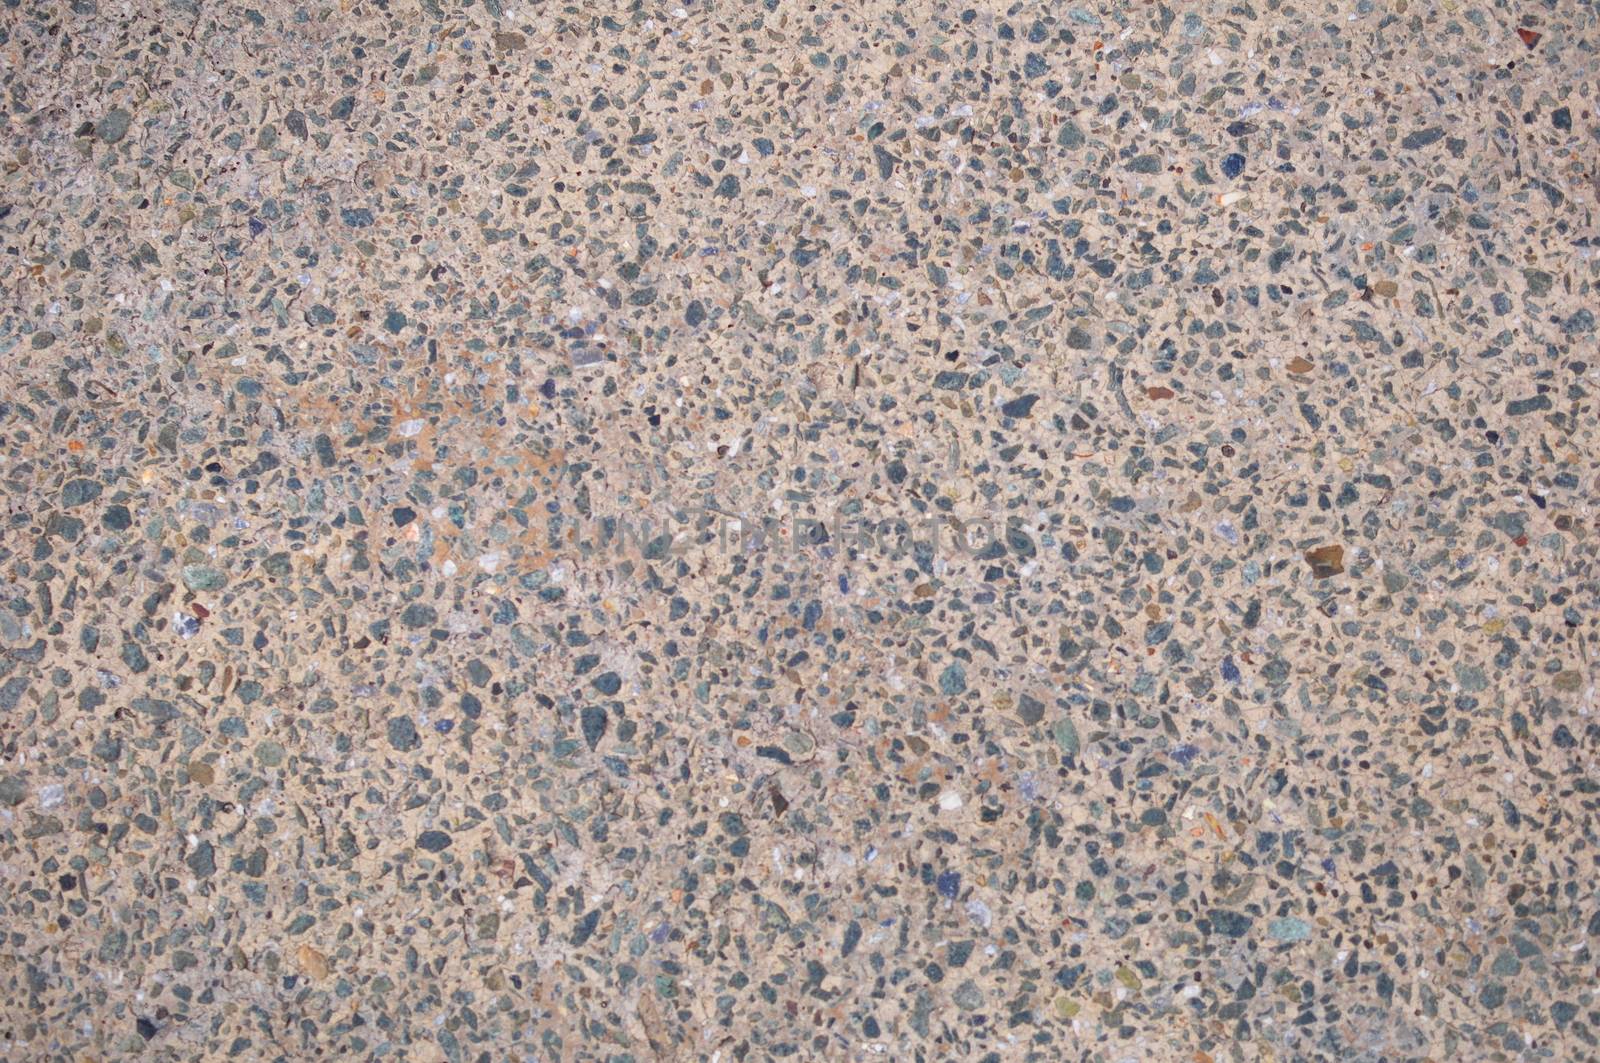 Background, Decorative Pavement Surfacing Made From a Stone Crumb